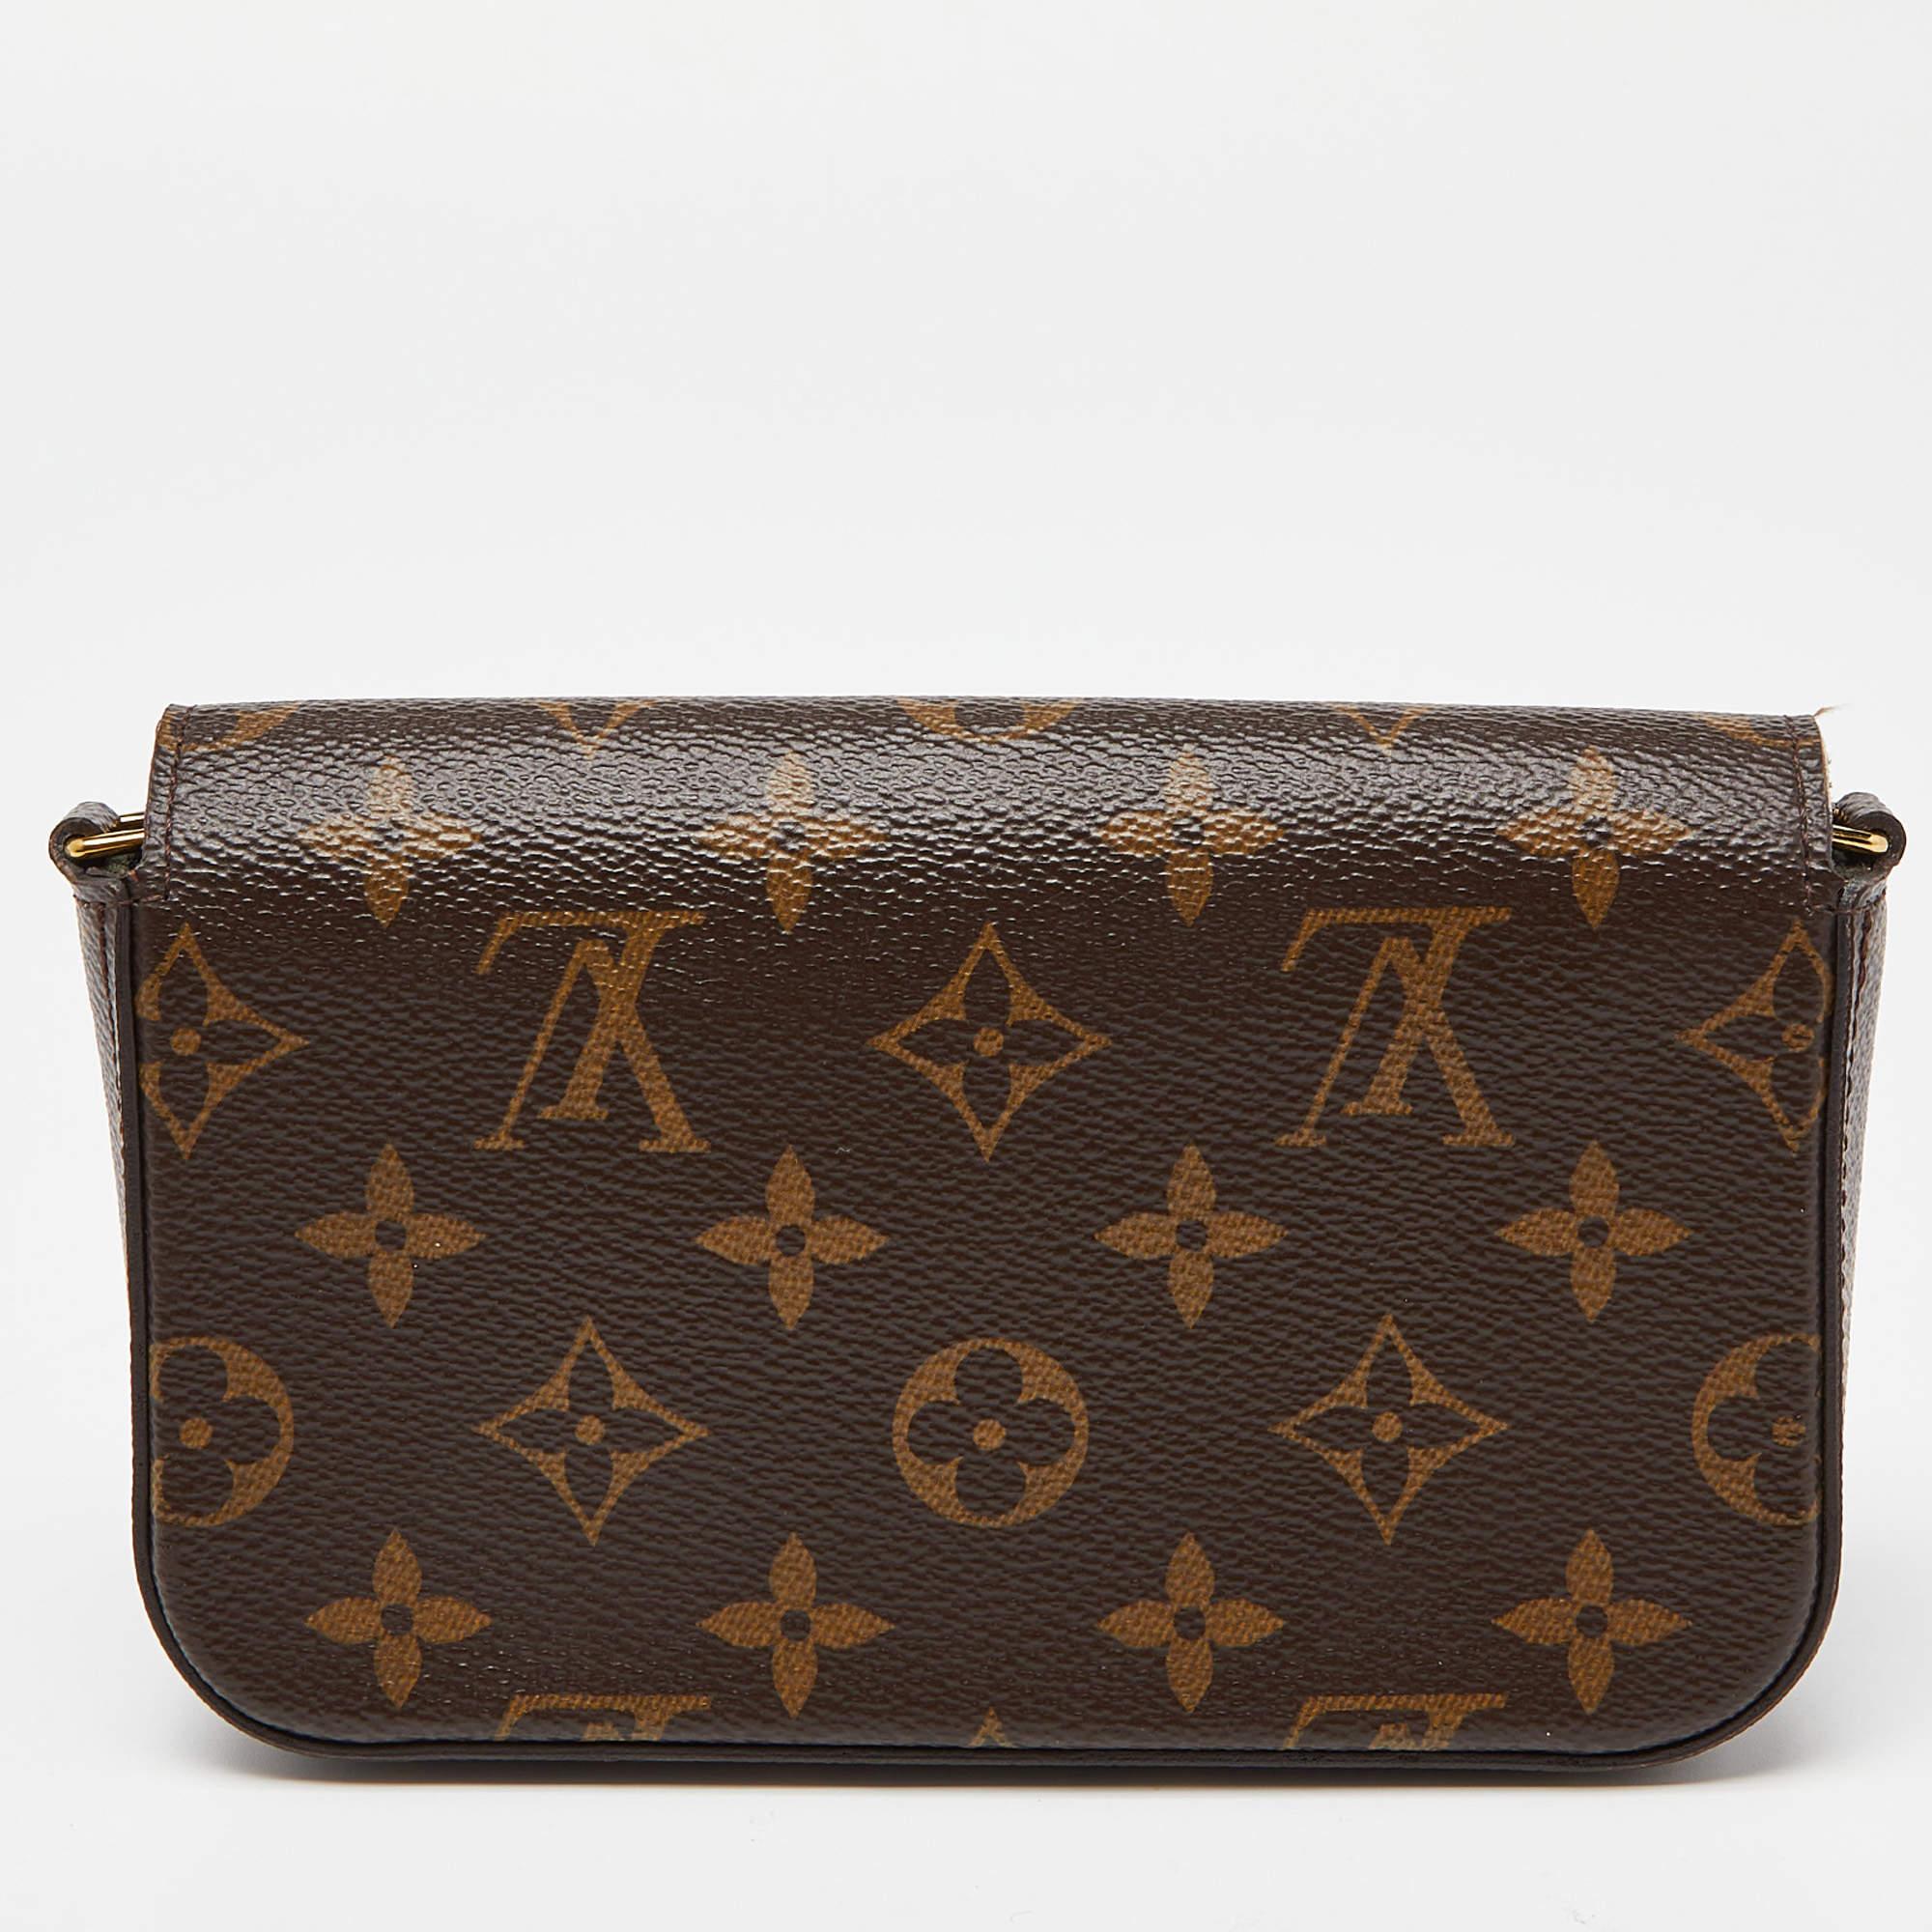 The Louis Vuitton Félicie Strap & Go Pochette has the Félicie Pochette, a jacquard strap, and a removable pouch. The design is crafted from Monogram canvas and gold-tone hardware. It can be carried as a clutch and a shoulder bag.

Includes: Original